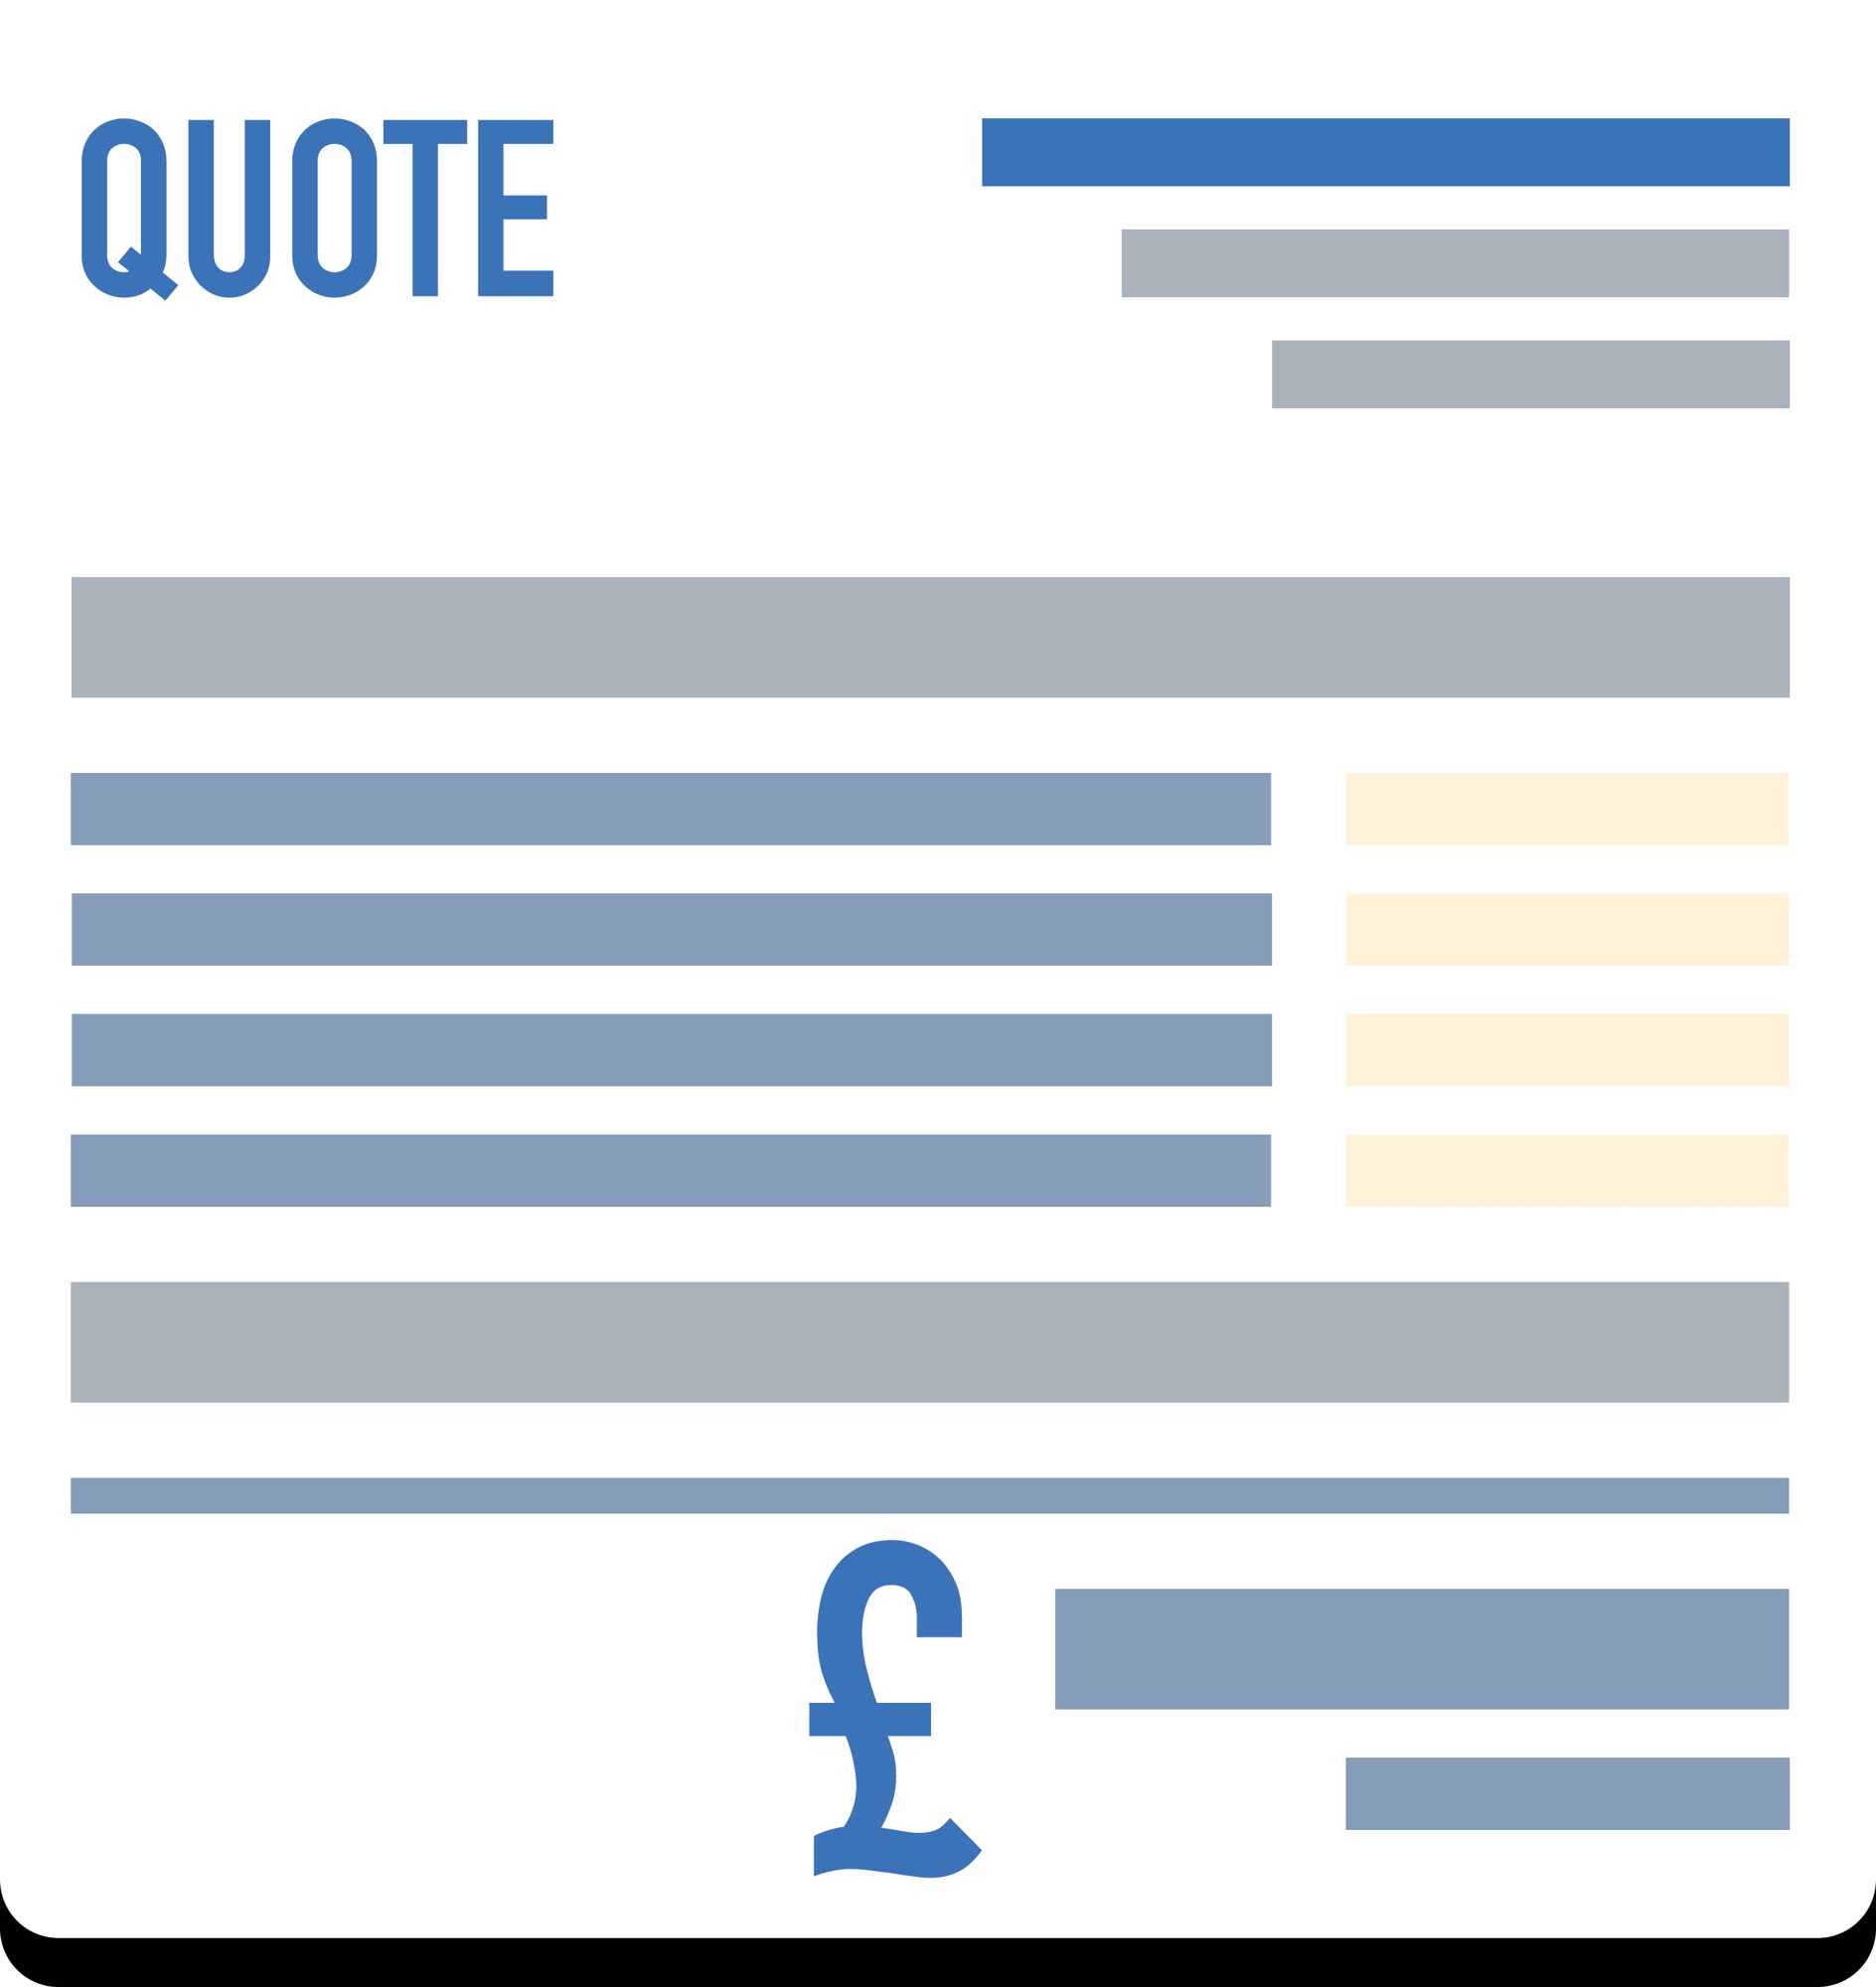 Quote template for Appliance Repair company